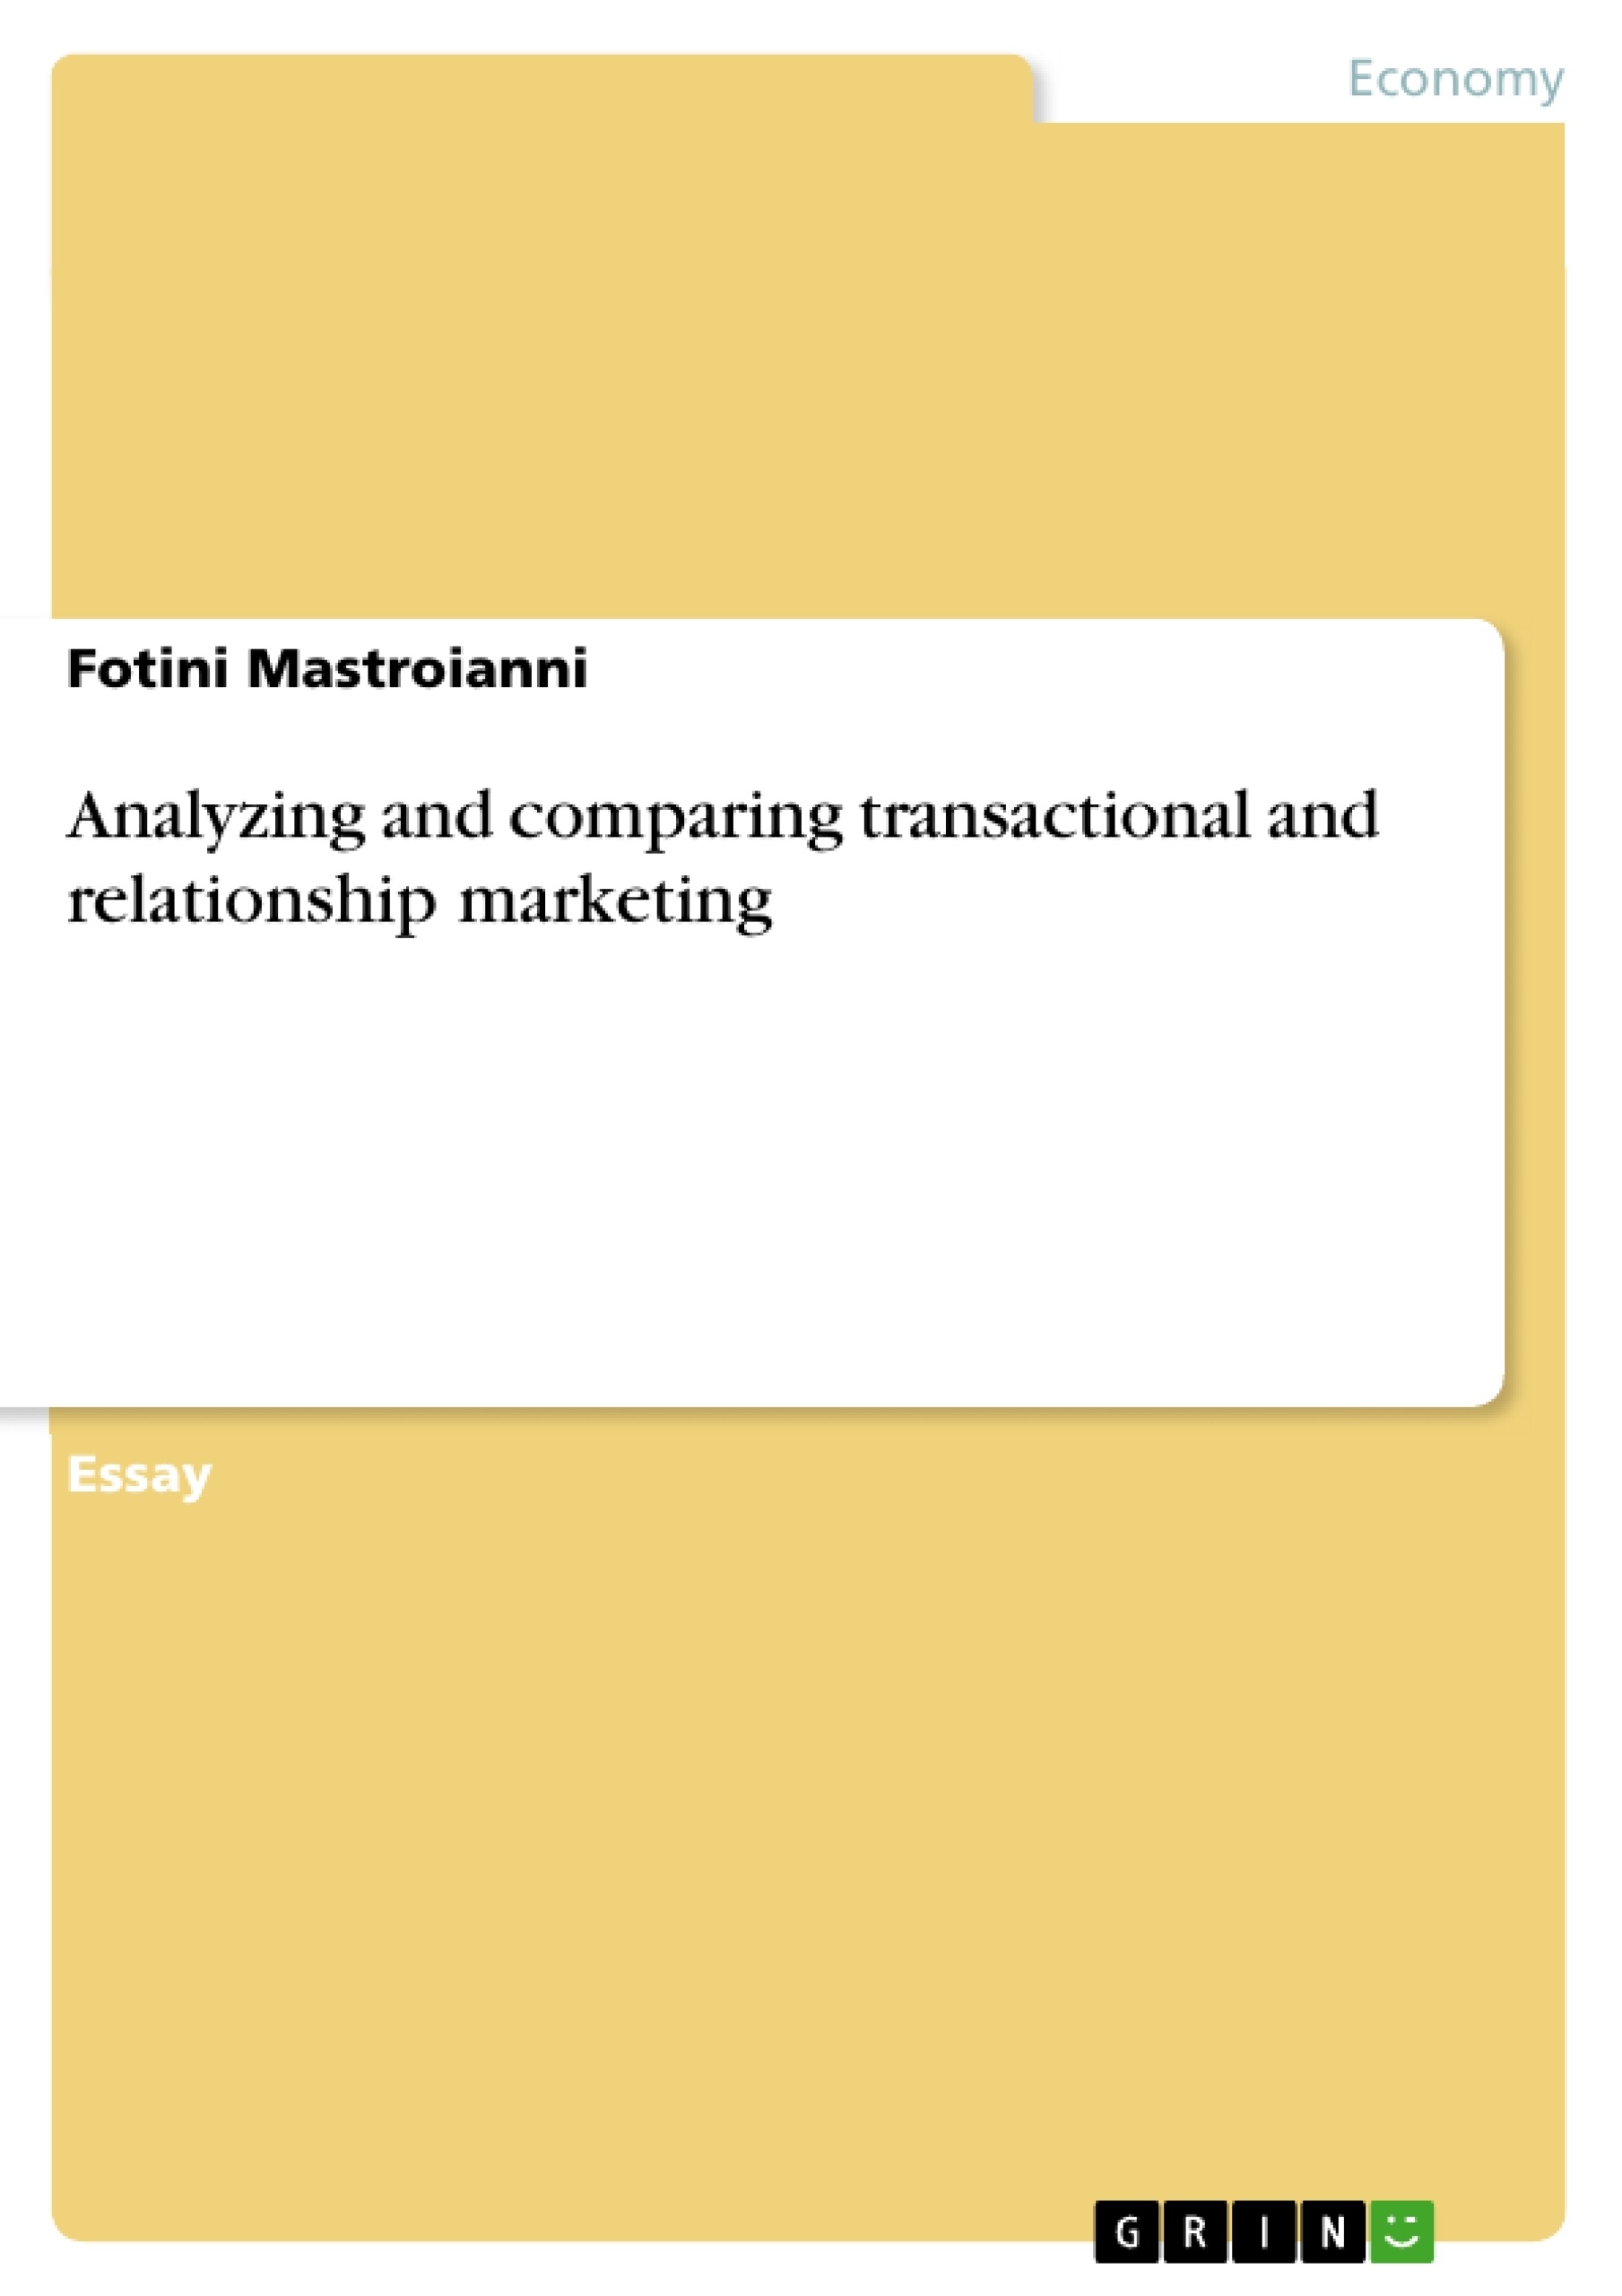 Title: Analyzing and comparing transactional and relationship marketing